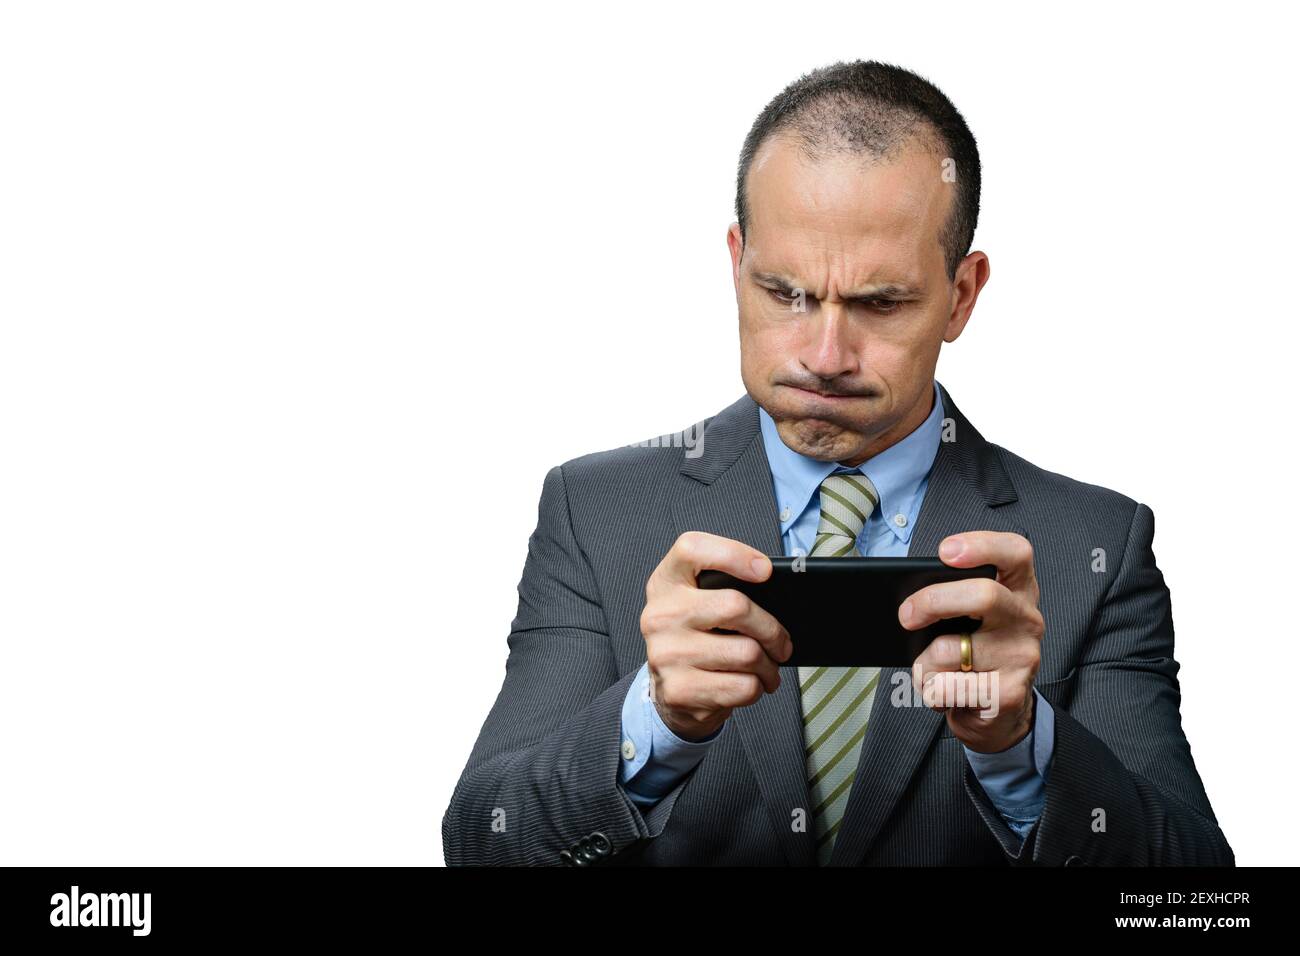 Mature man with suit and tie, playing on his smartphone and breathing through his nose. Stock Photo